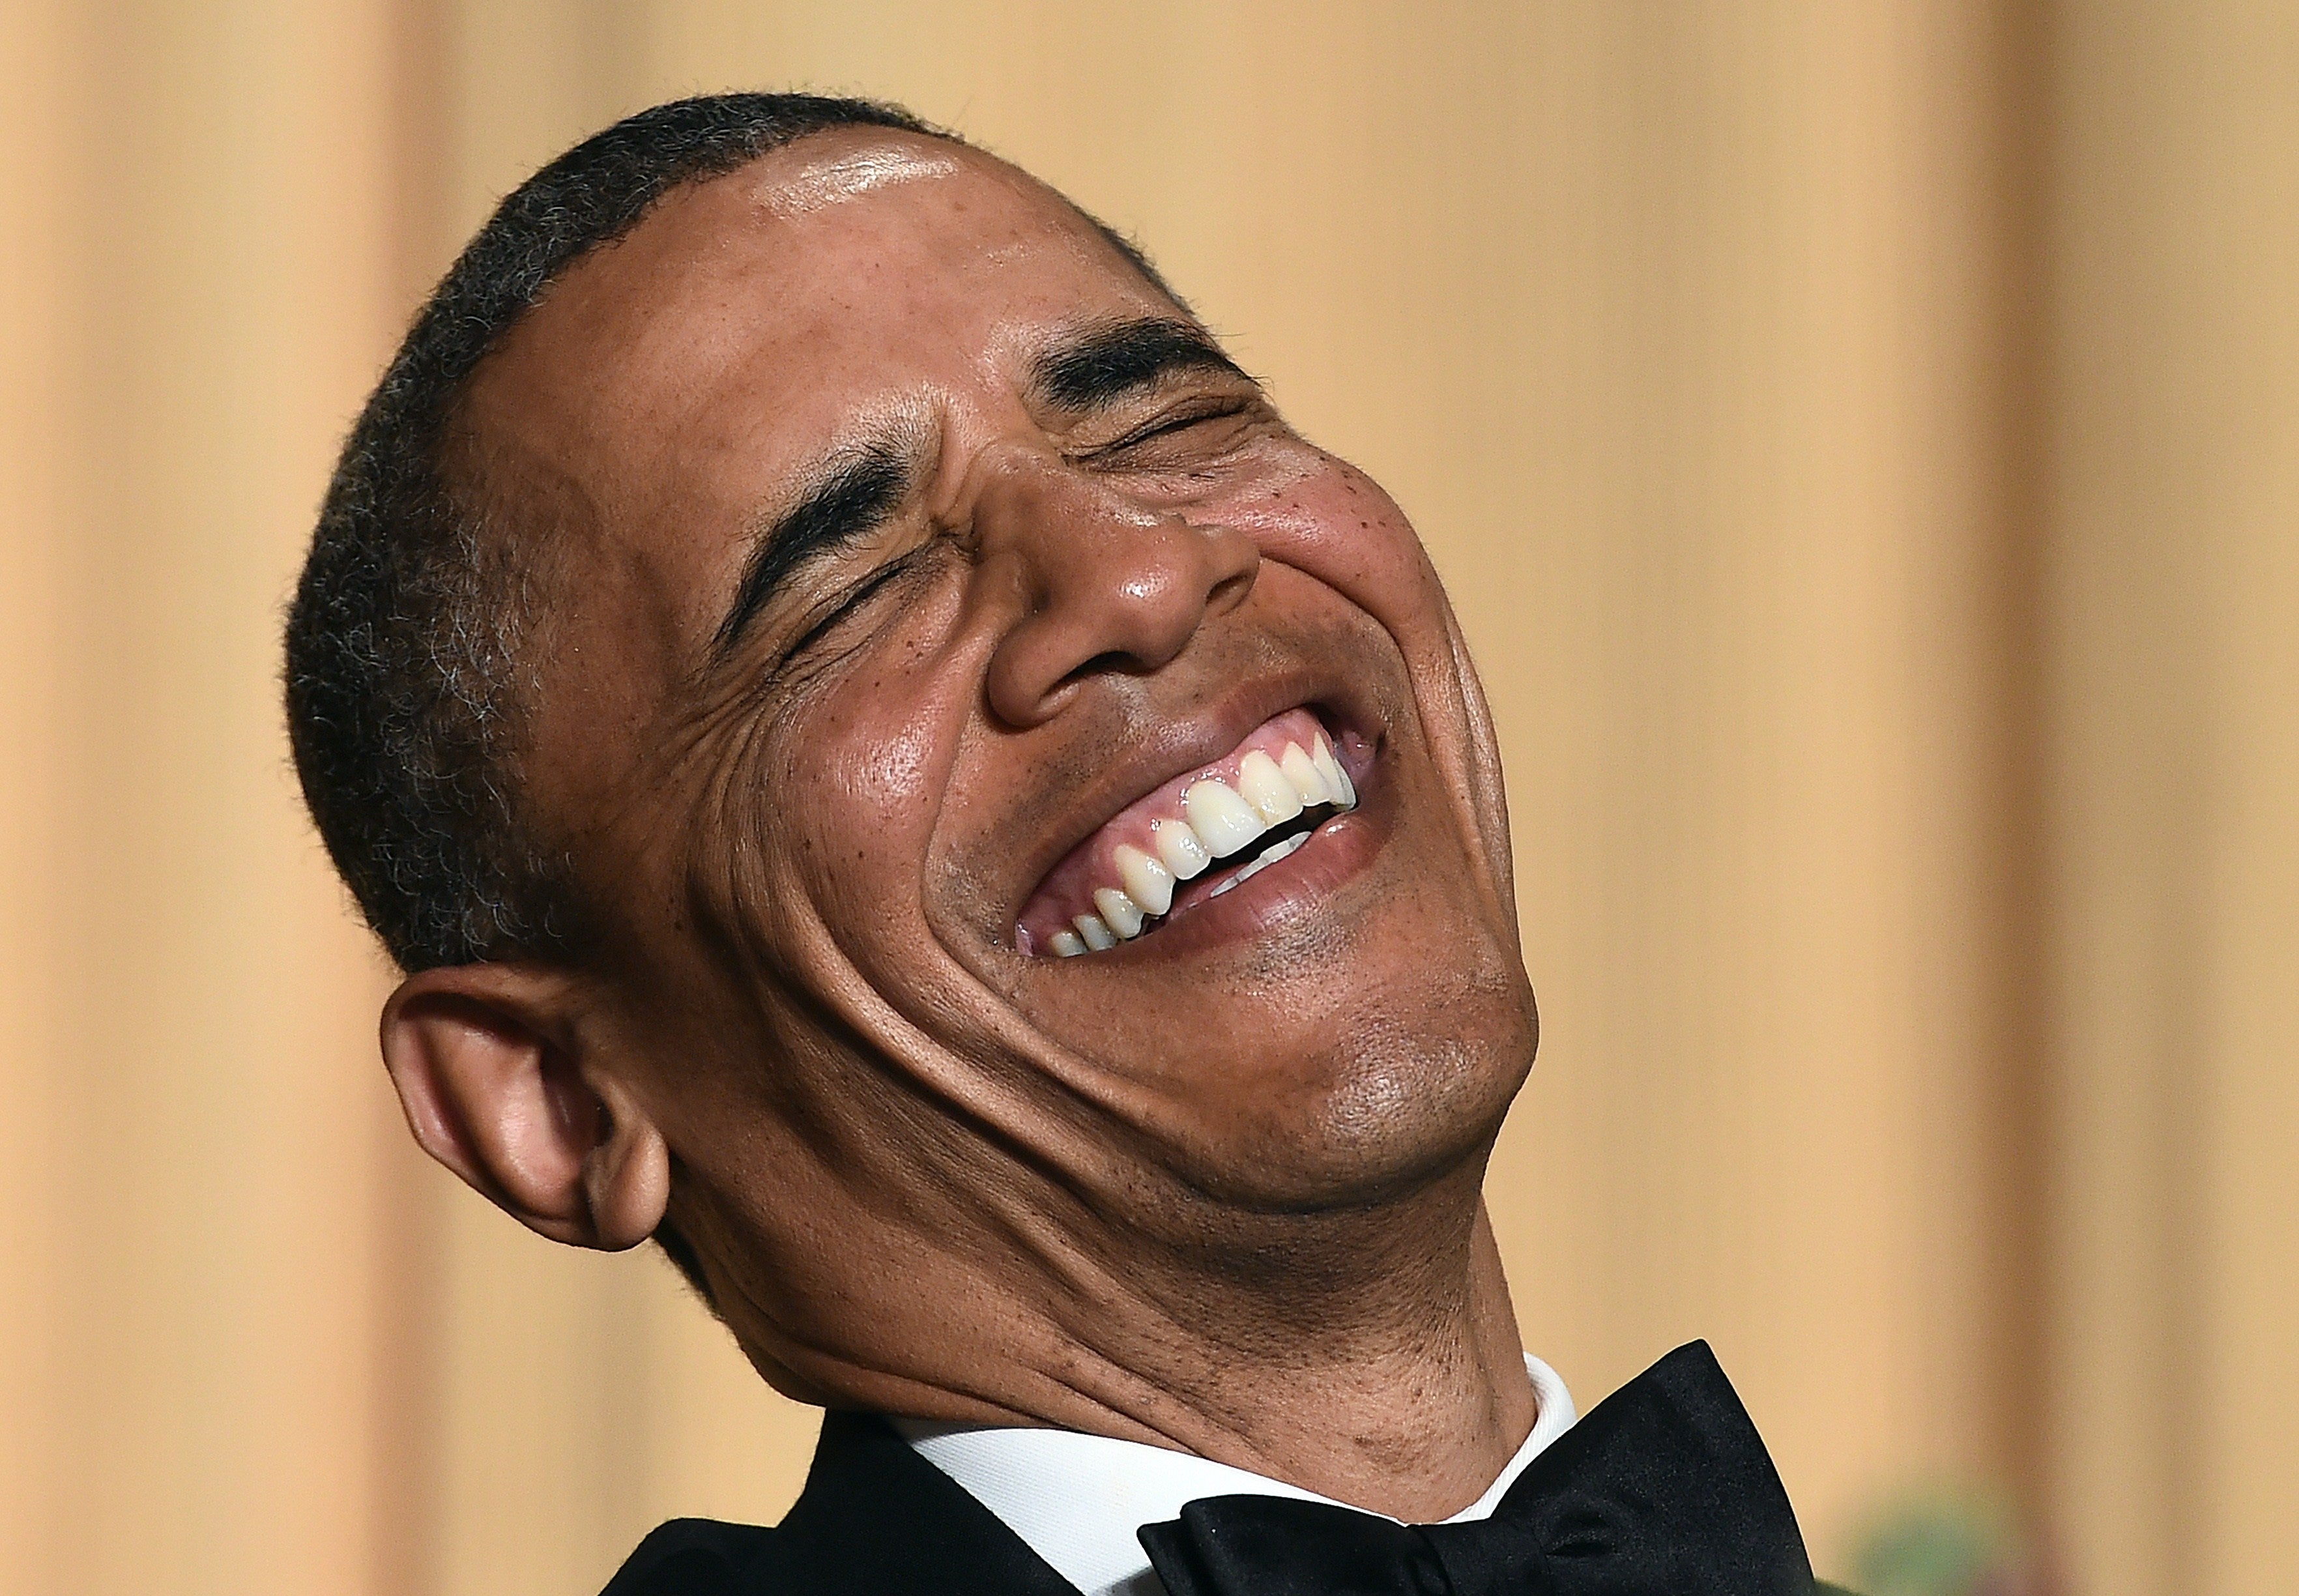 Barack Obama Has ‘One Last Dad Joke’ as President — and It’s Hilarious